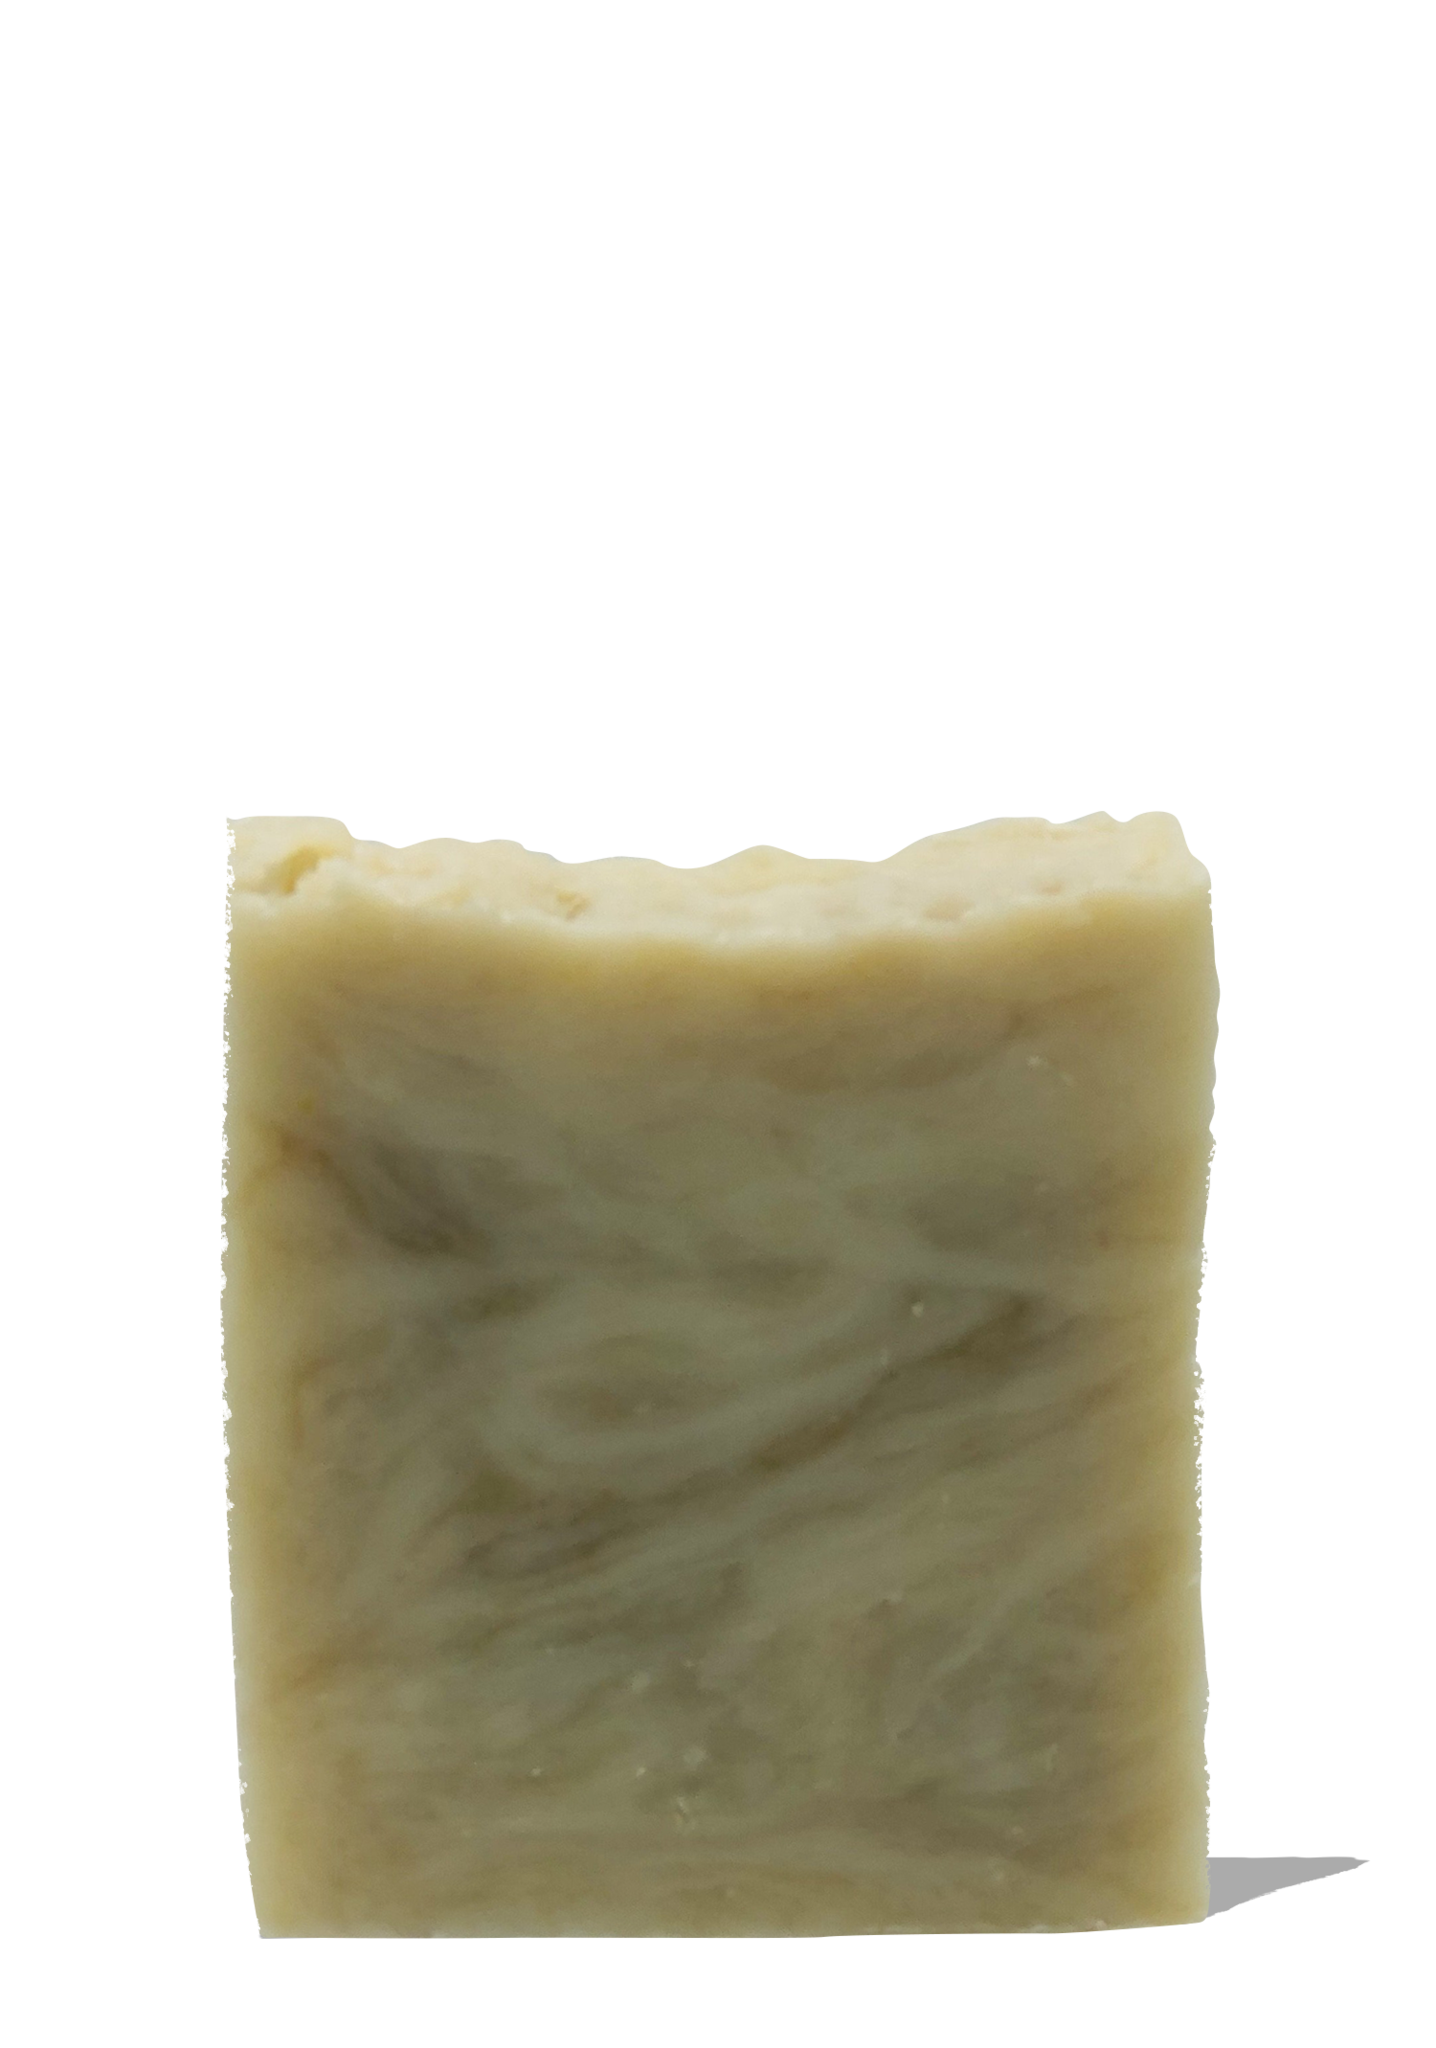 the bar of soap